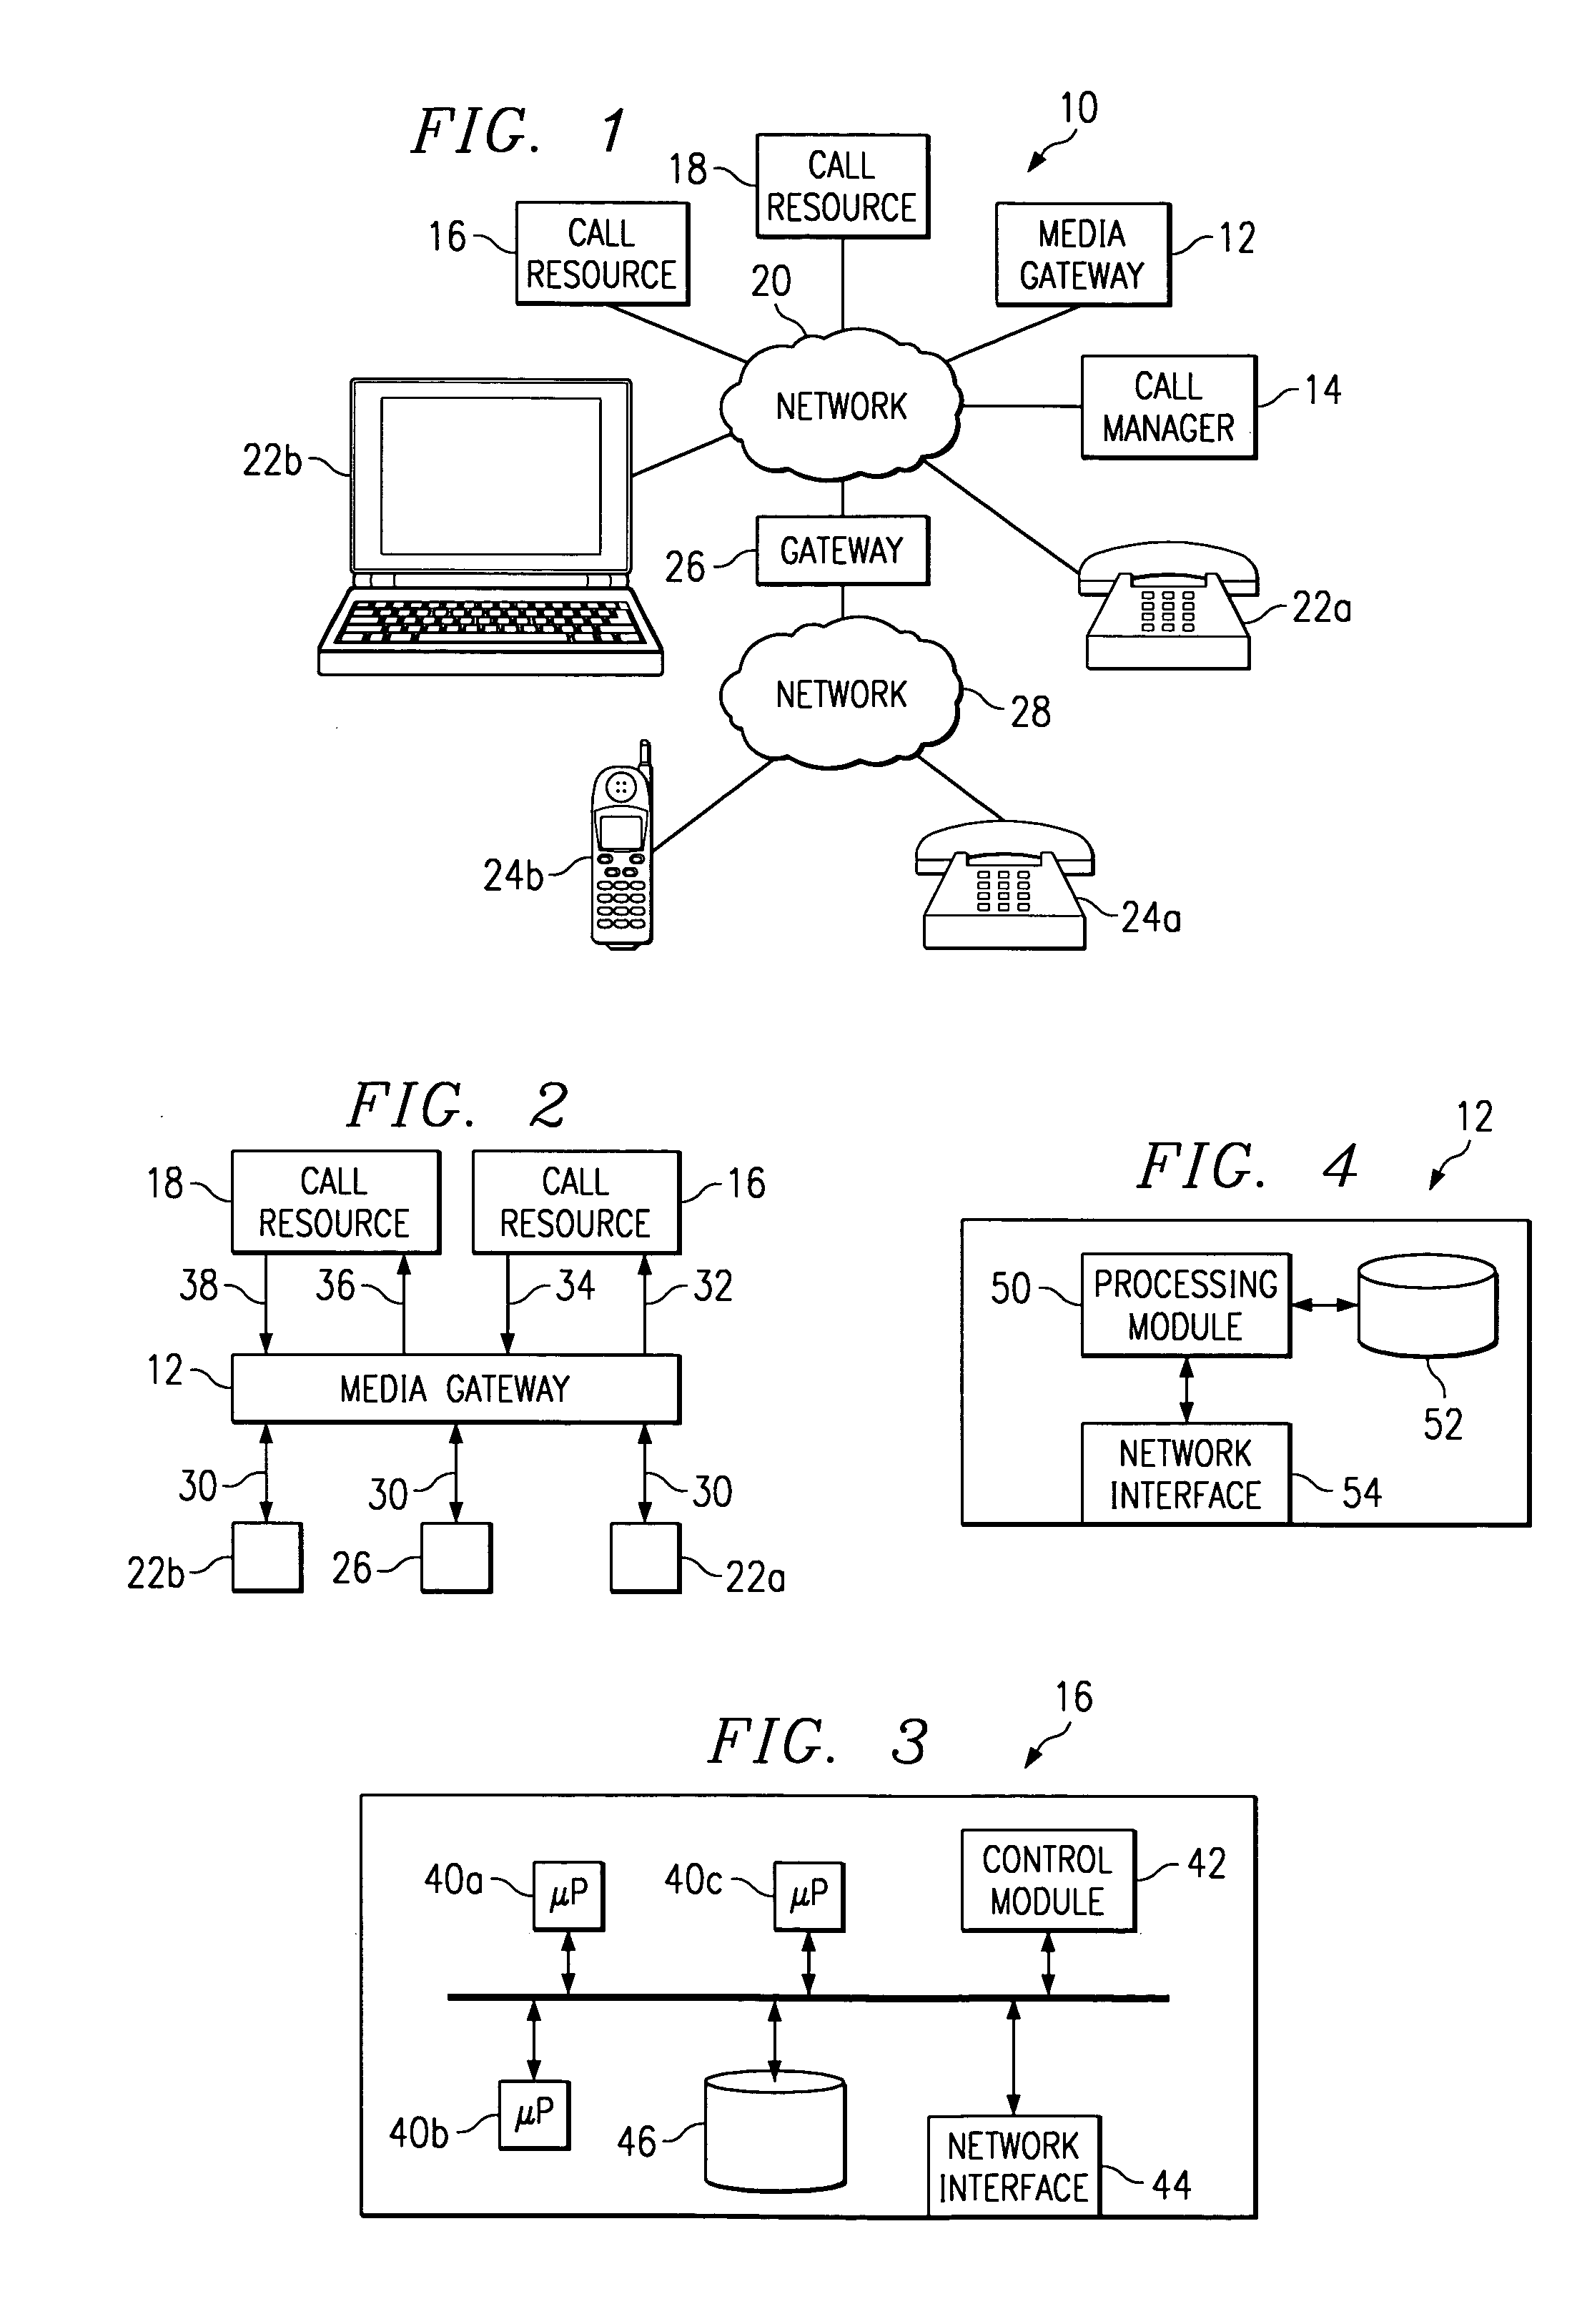 Apparatus and method for allocating call resources during a conference call